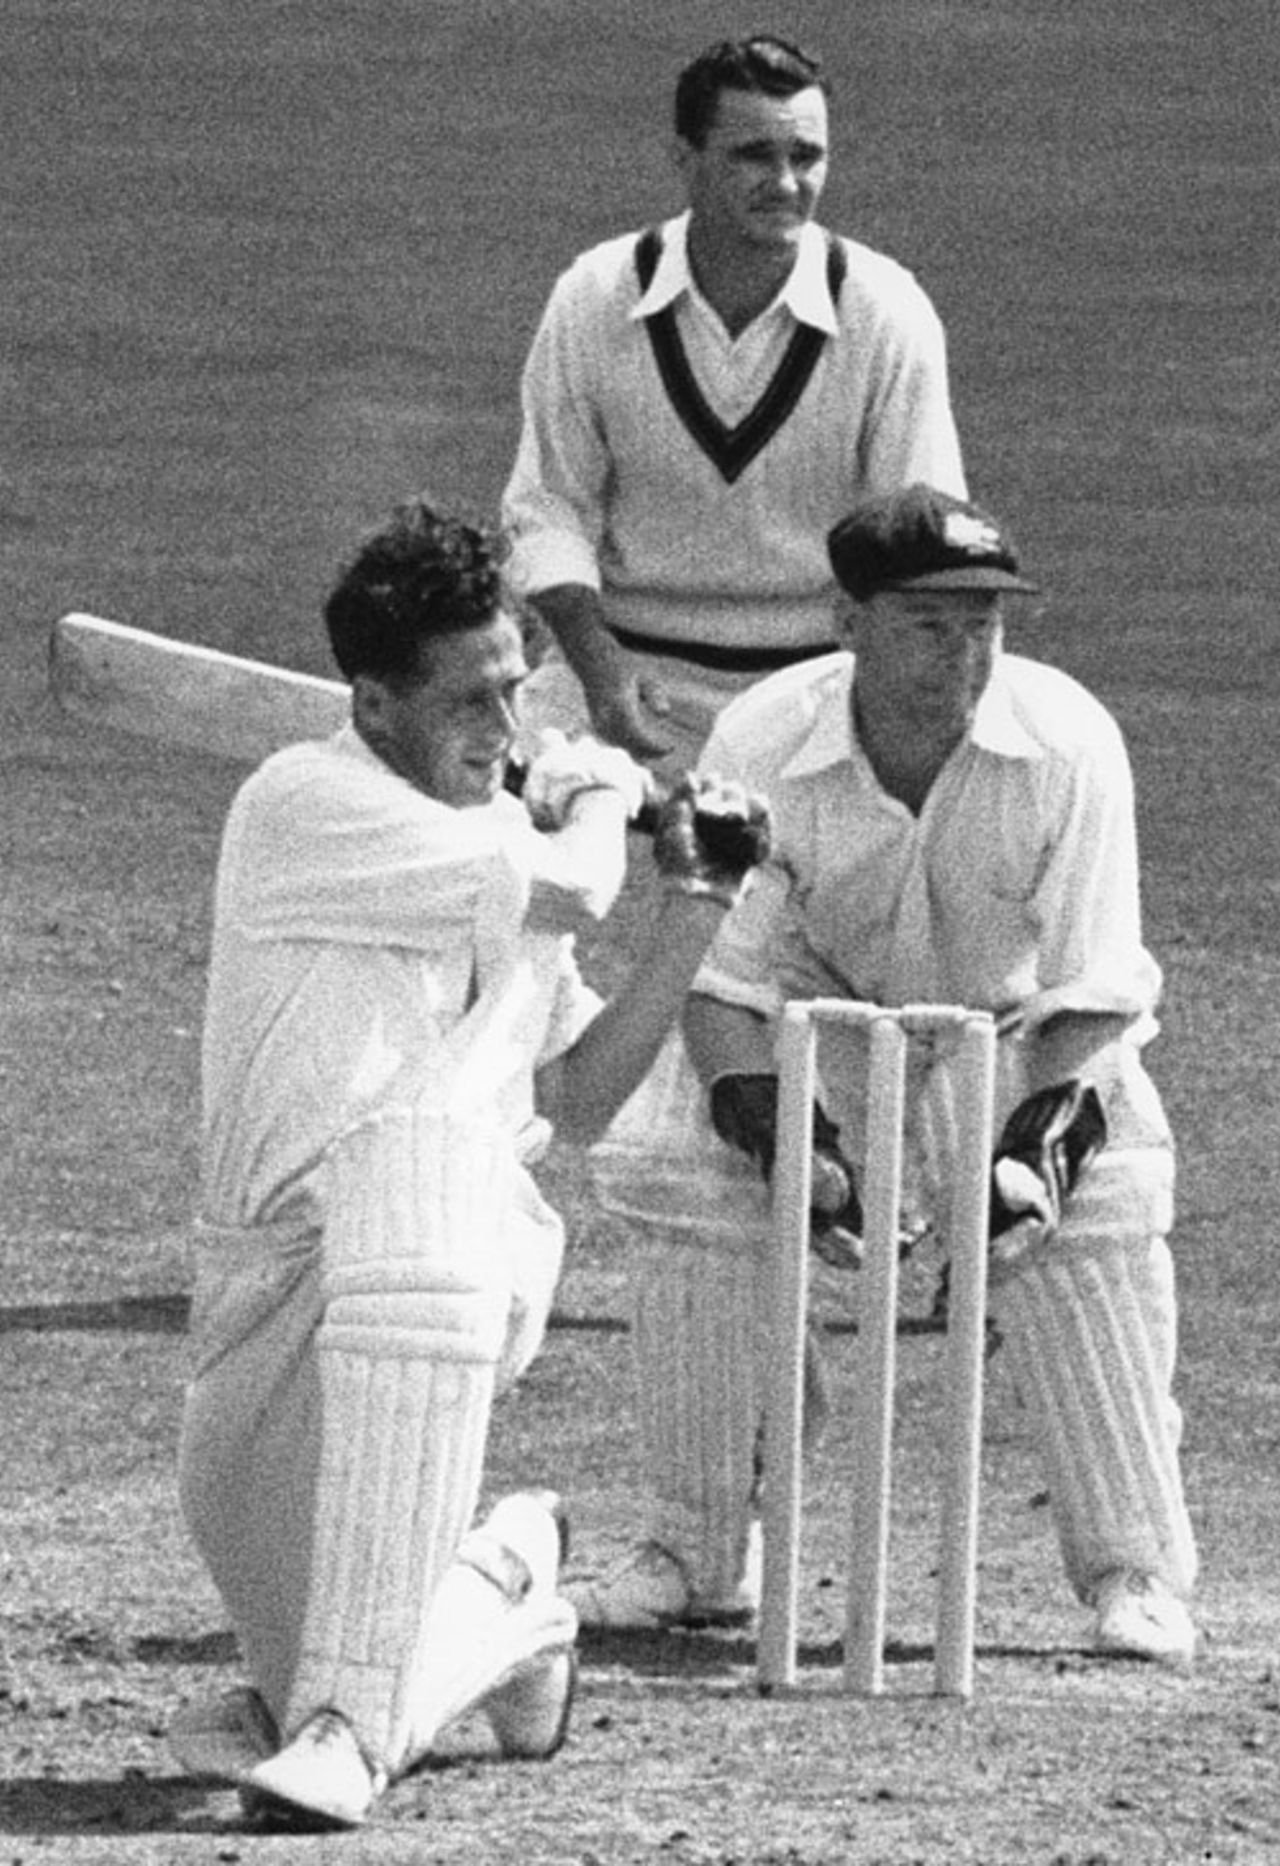 Trevor Bailey plays the sweep shot, England v Australia, 5th Test, The Oval, 4th day, August 18, 1953